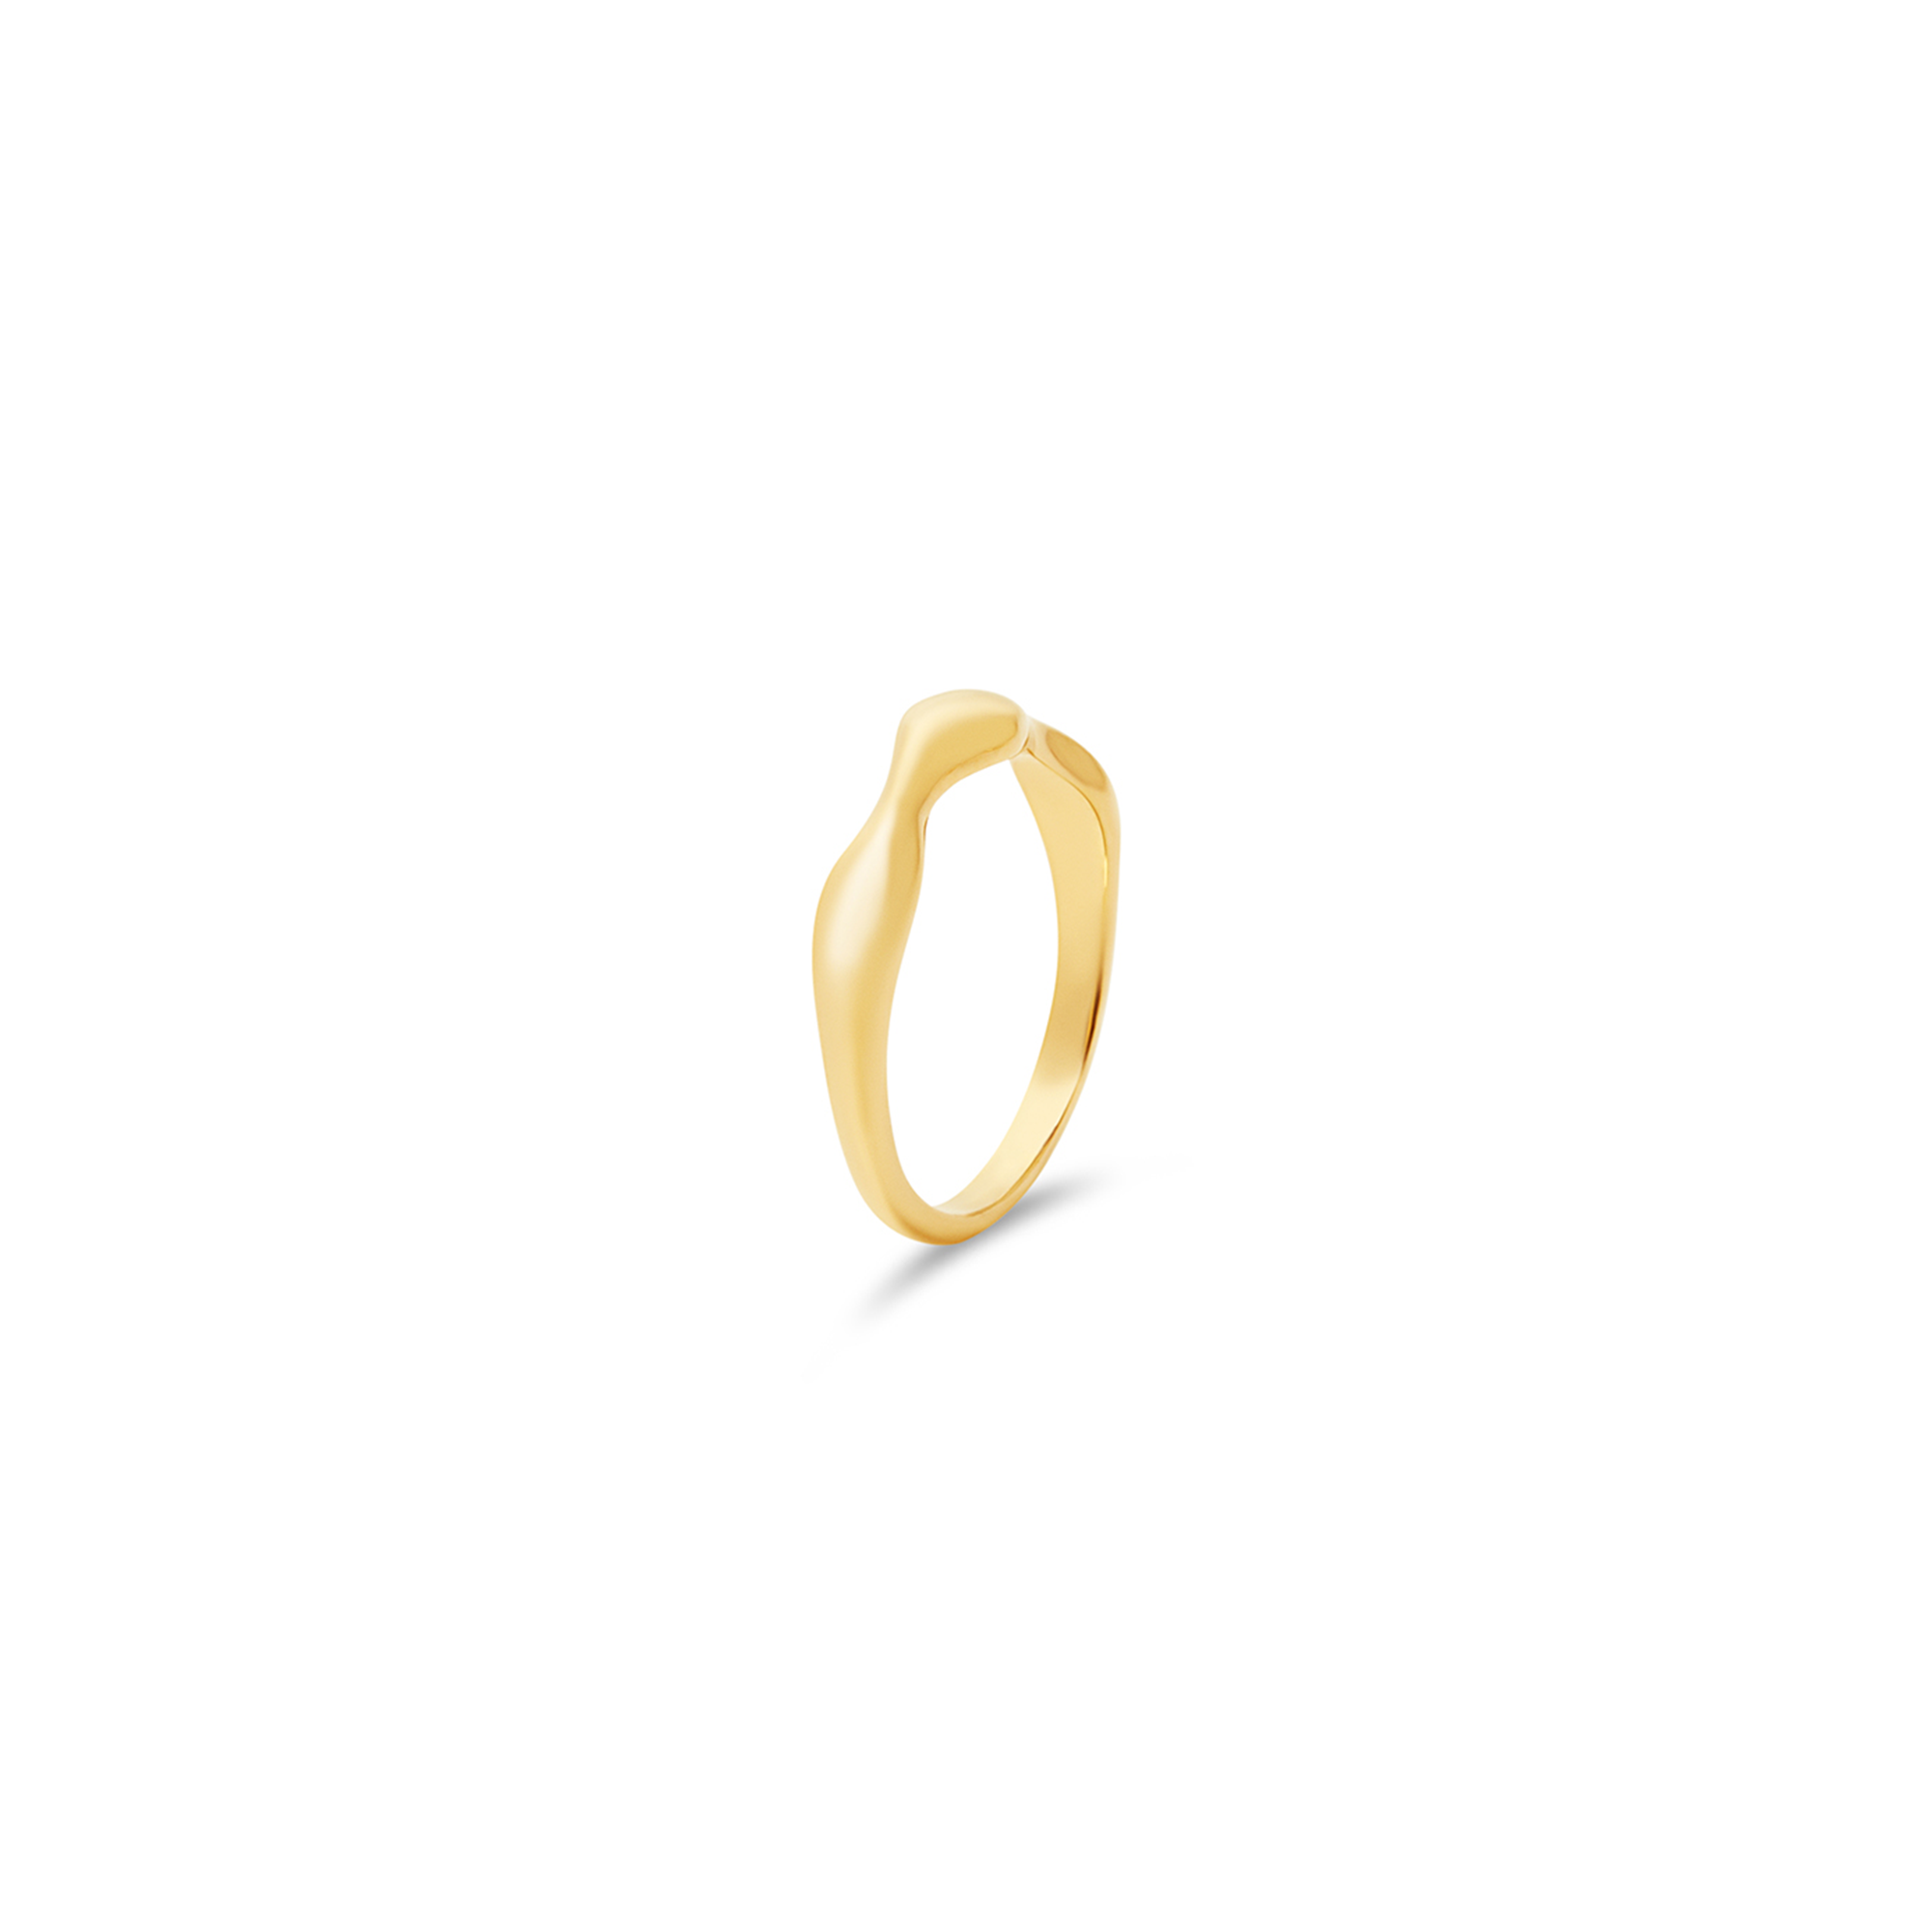 THE BAMBOO RING